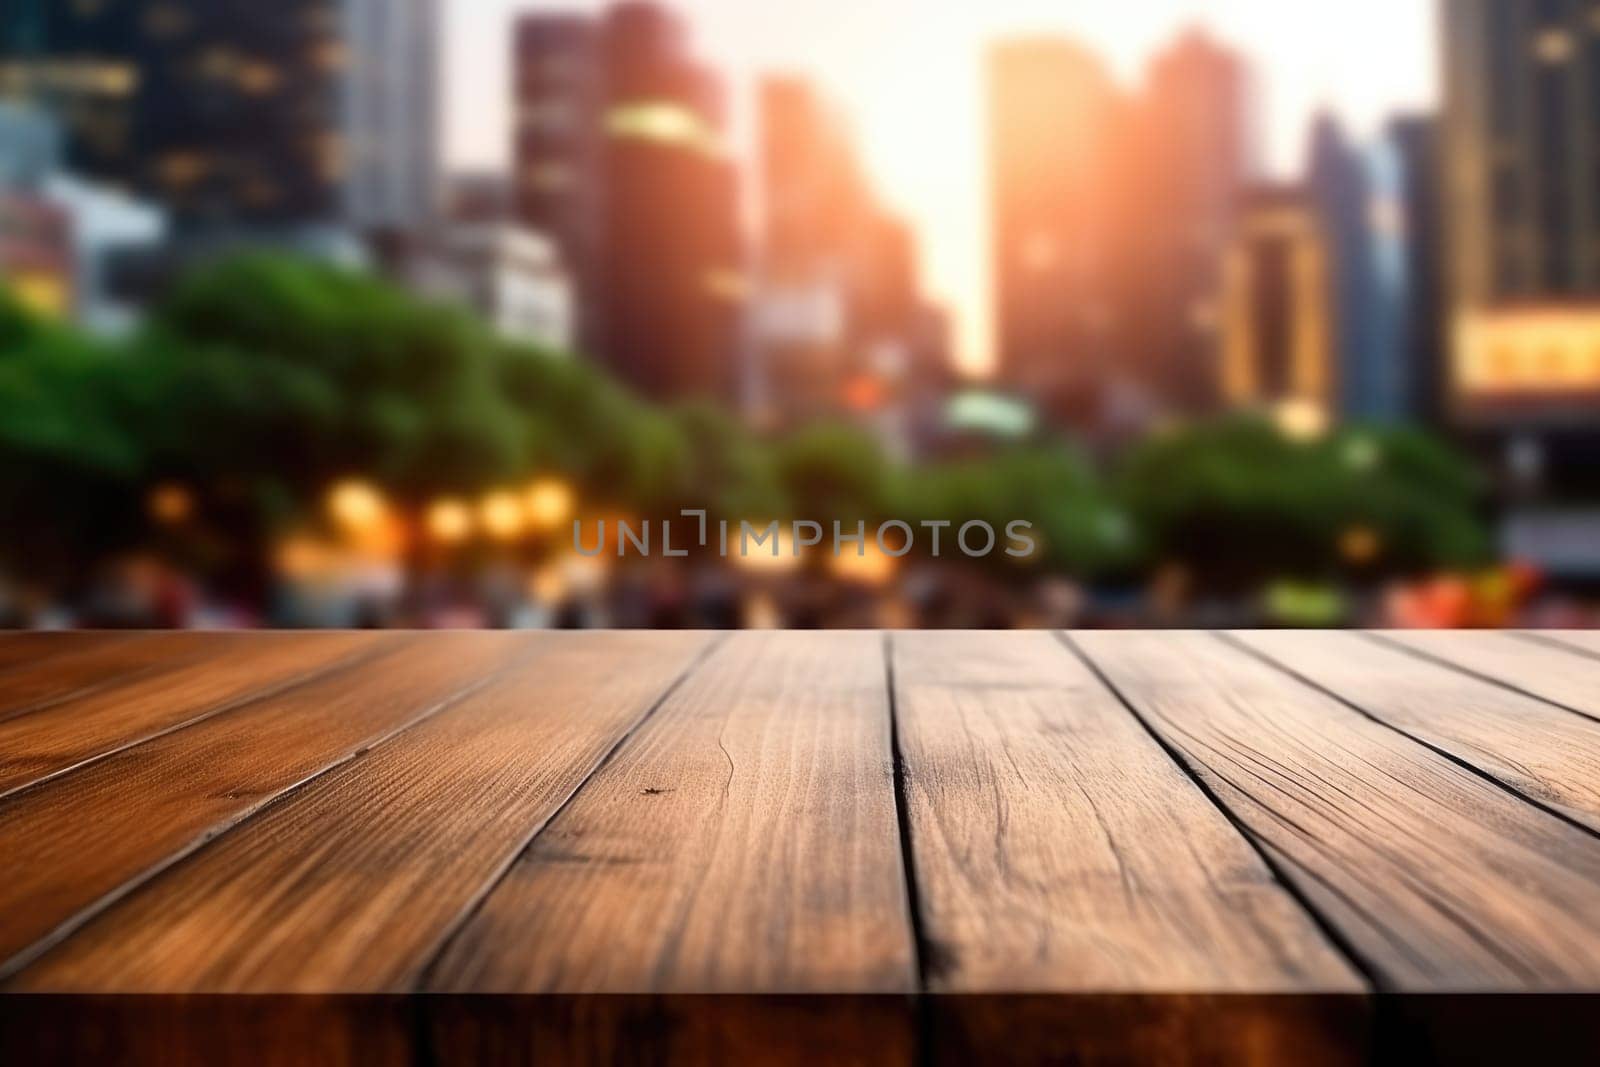 The empty wooden table top with blur background of street in downtown business district with people walking. Exuberant image.